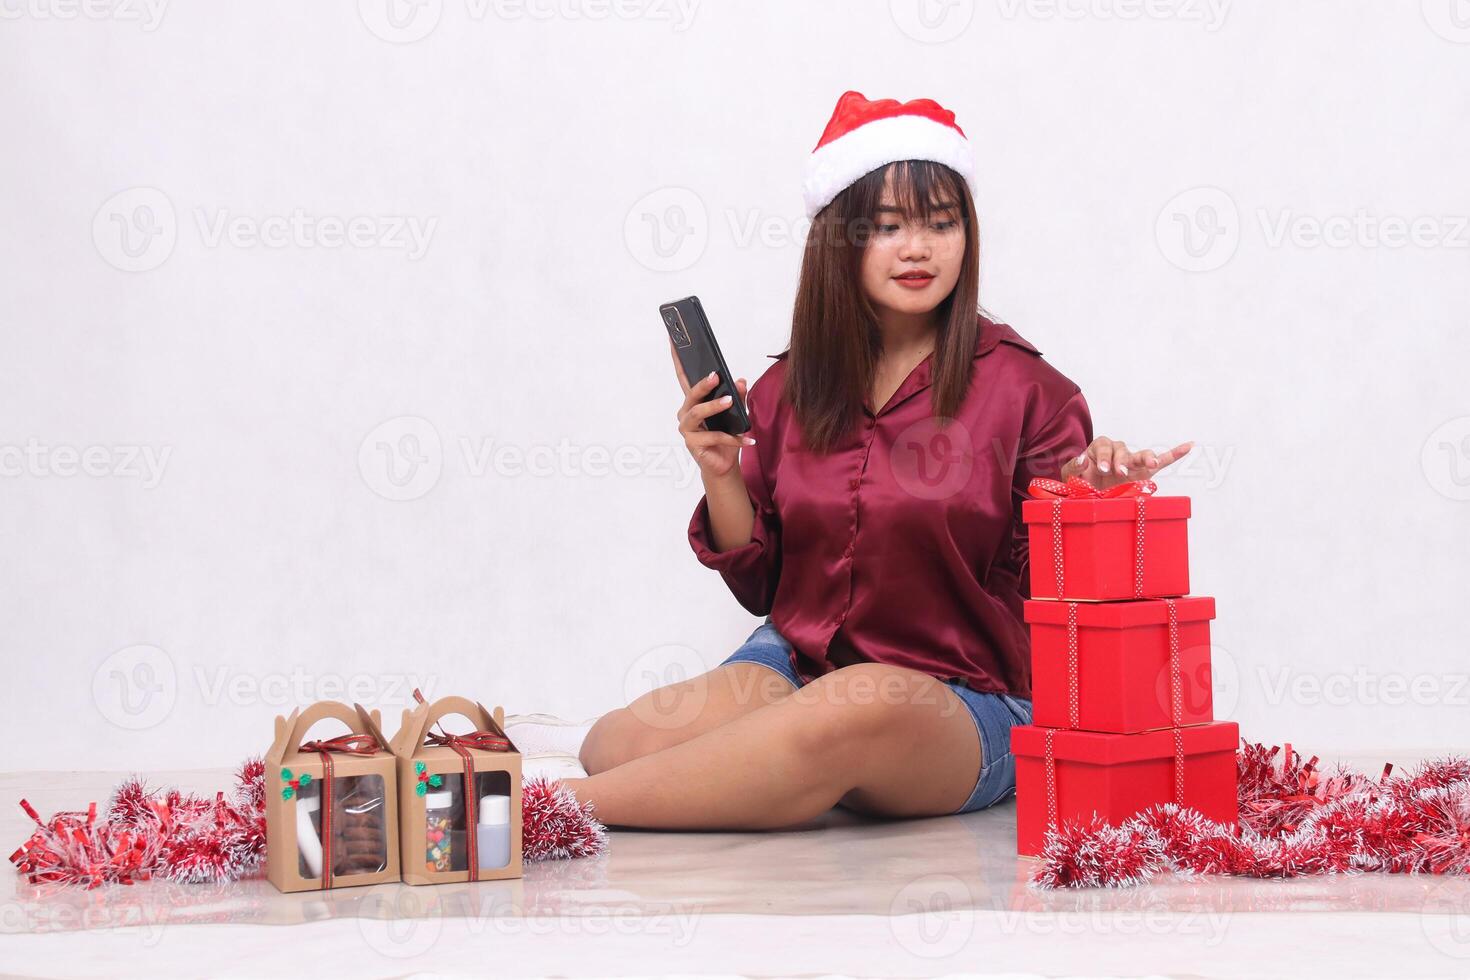 Beautiful young Southeast Asian girl checking orders next to 3 gift boxes of hampers at Christmas wearing Santa headband and red shirt on white background for promotion and advertising photo